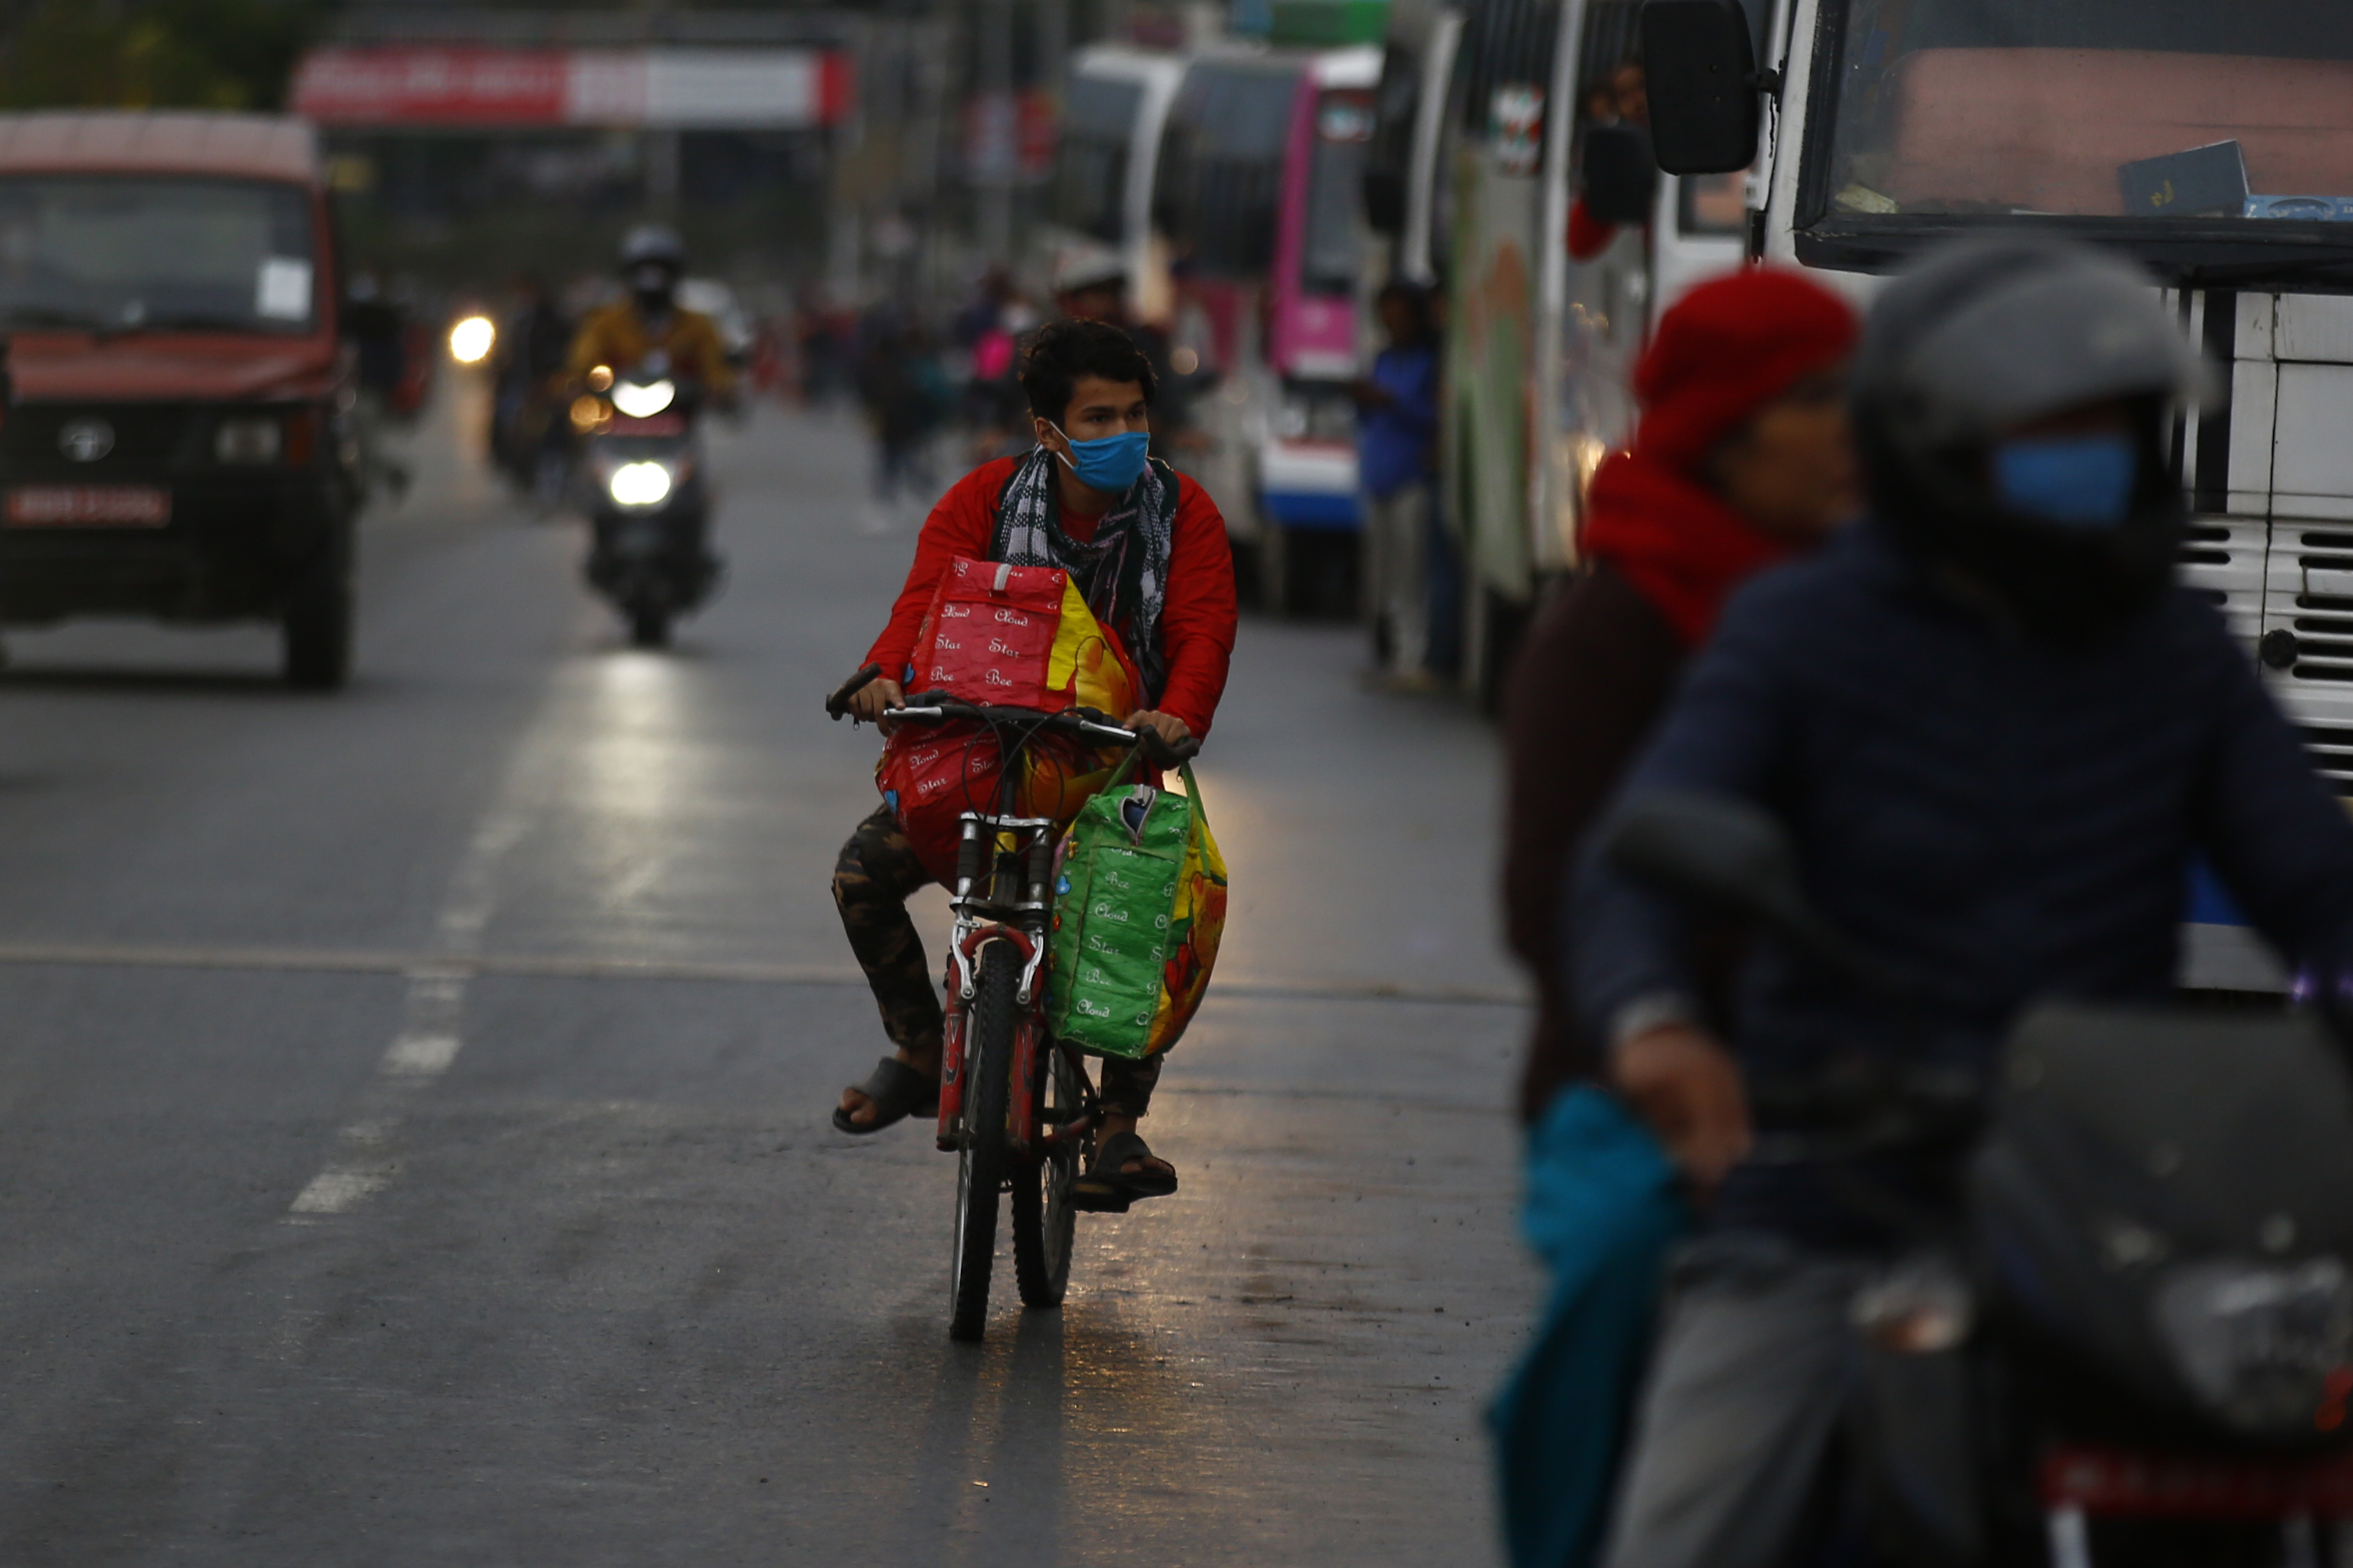 A man is seen riding his bicycle where people are waiting to board buses to return to their native villages, in Kathmandu, on Tuesday, April 21, 2020. Photo: Skanda Gautam/THT